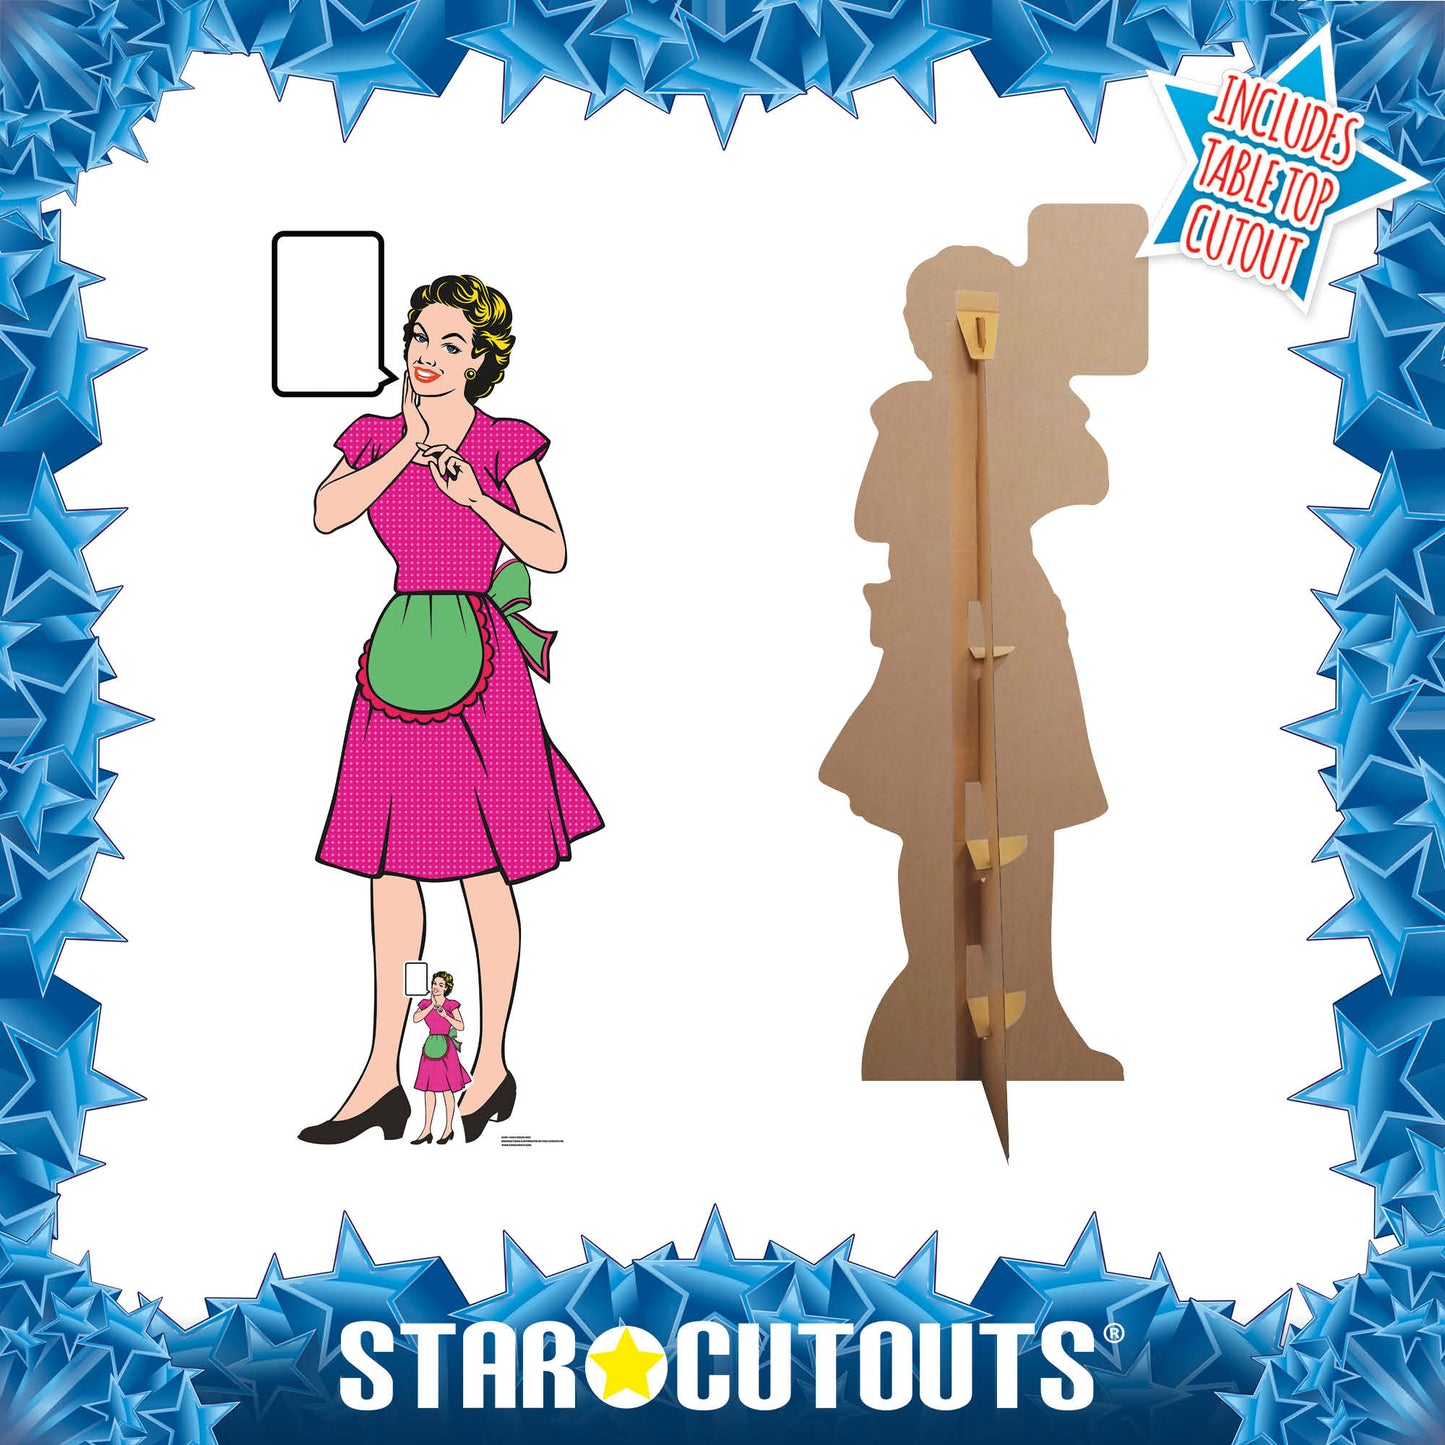 SC1224 1950's Style Housewife Pop Art Cardboard Cut Out Height 184cm